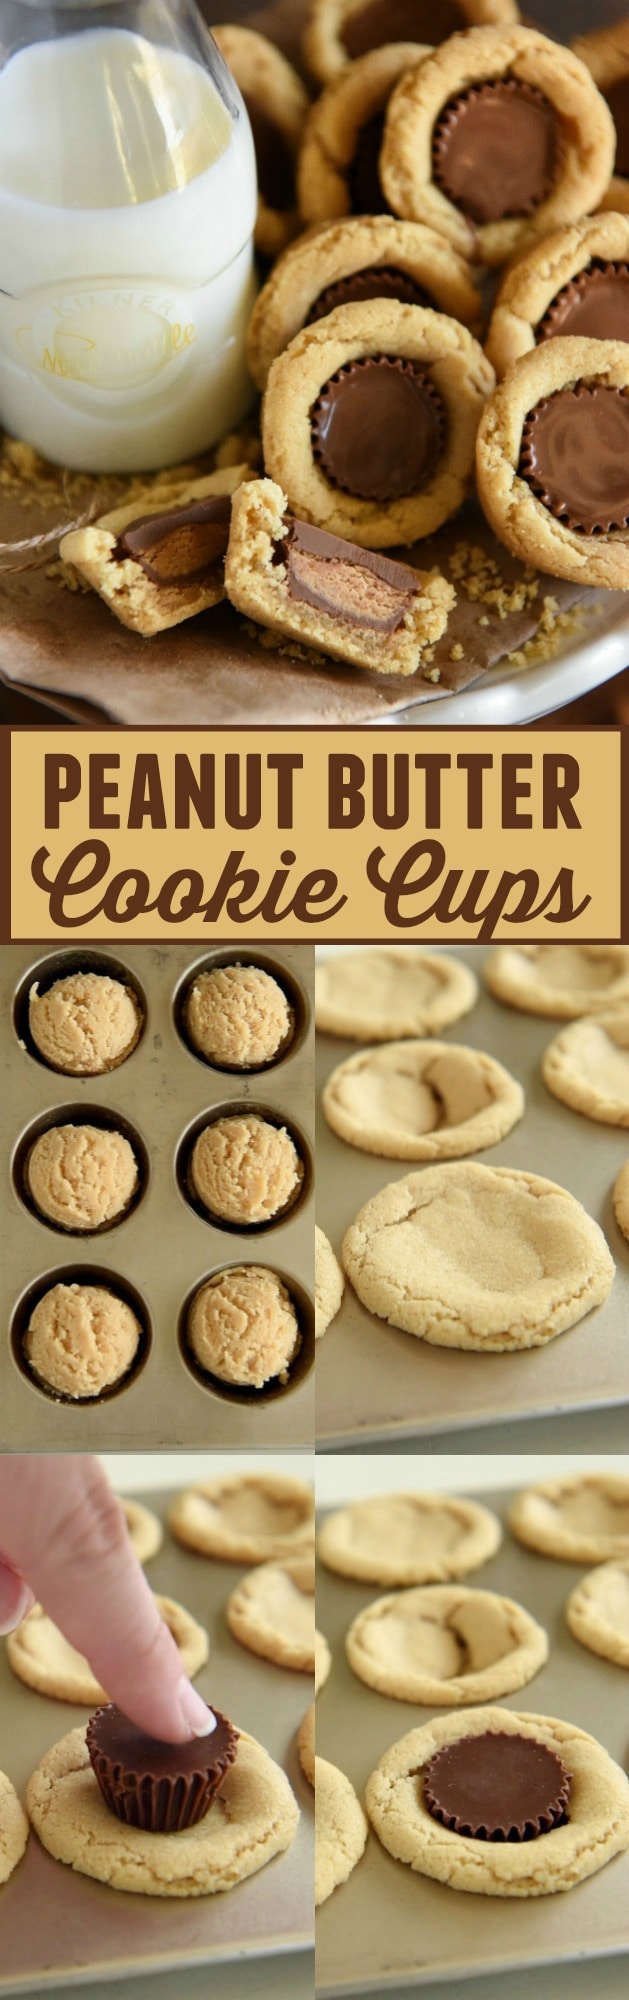 Peanut Butter Cookie Cups: soft homemade peanut butter cookie cups are baked in a mini muffin tin and then stuffed with chocolate Reese's peanut butter cups!